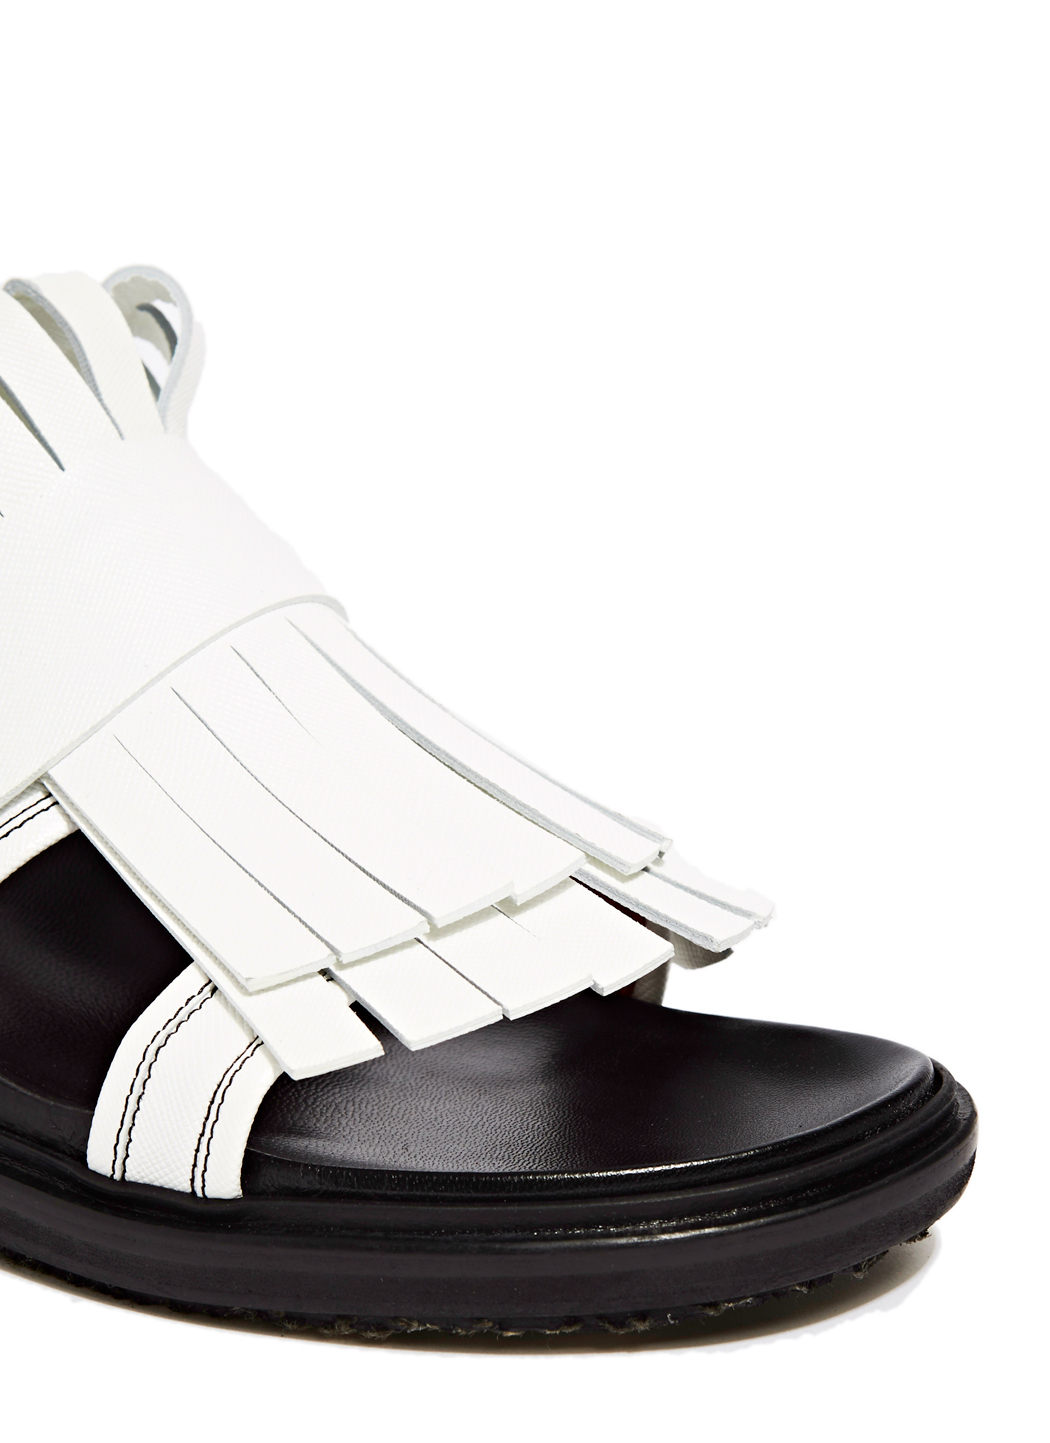 Lyst Marni Leather Fringe Sandals in White